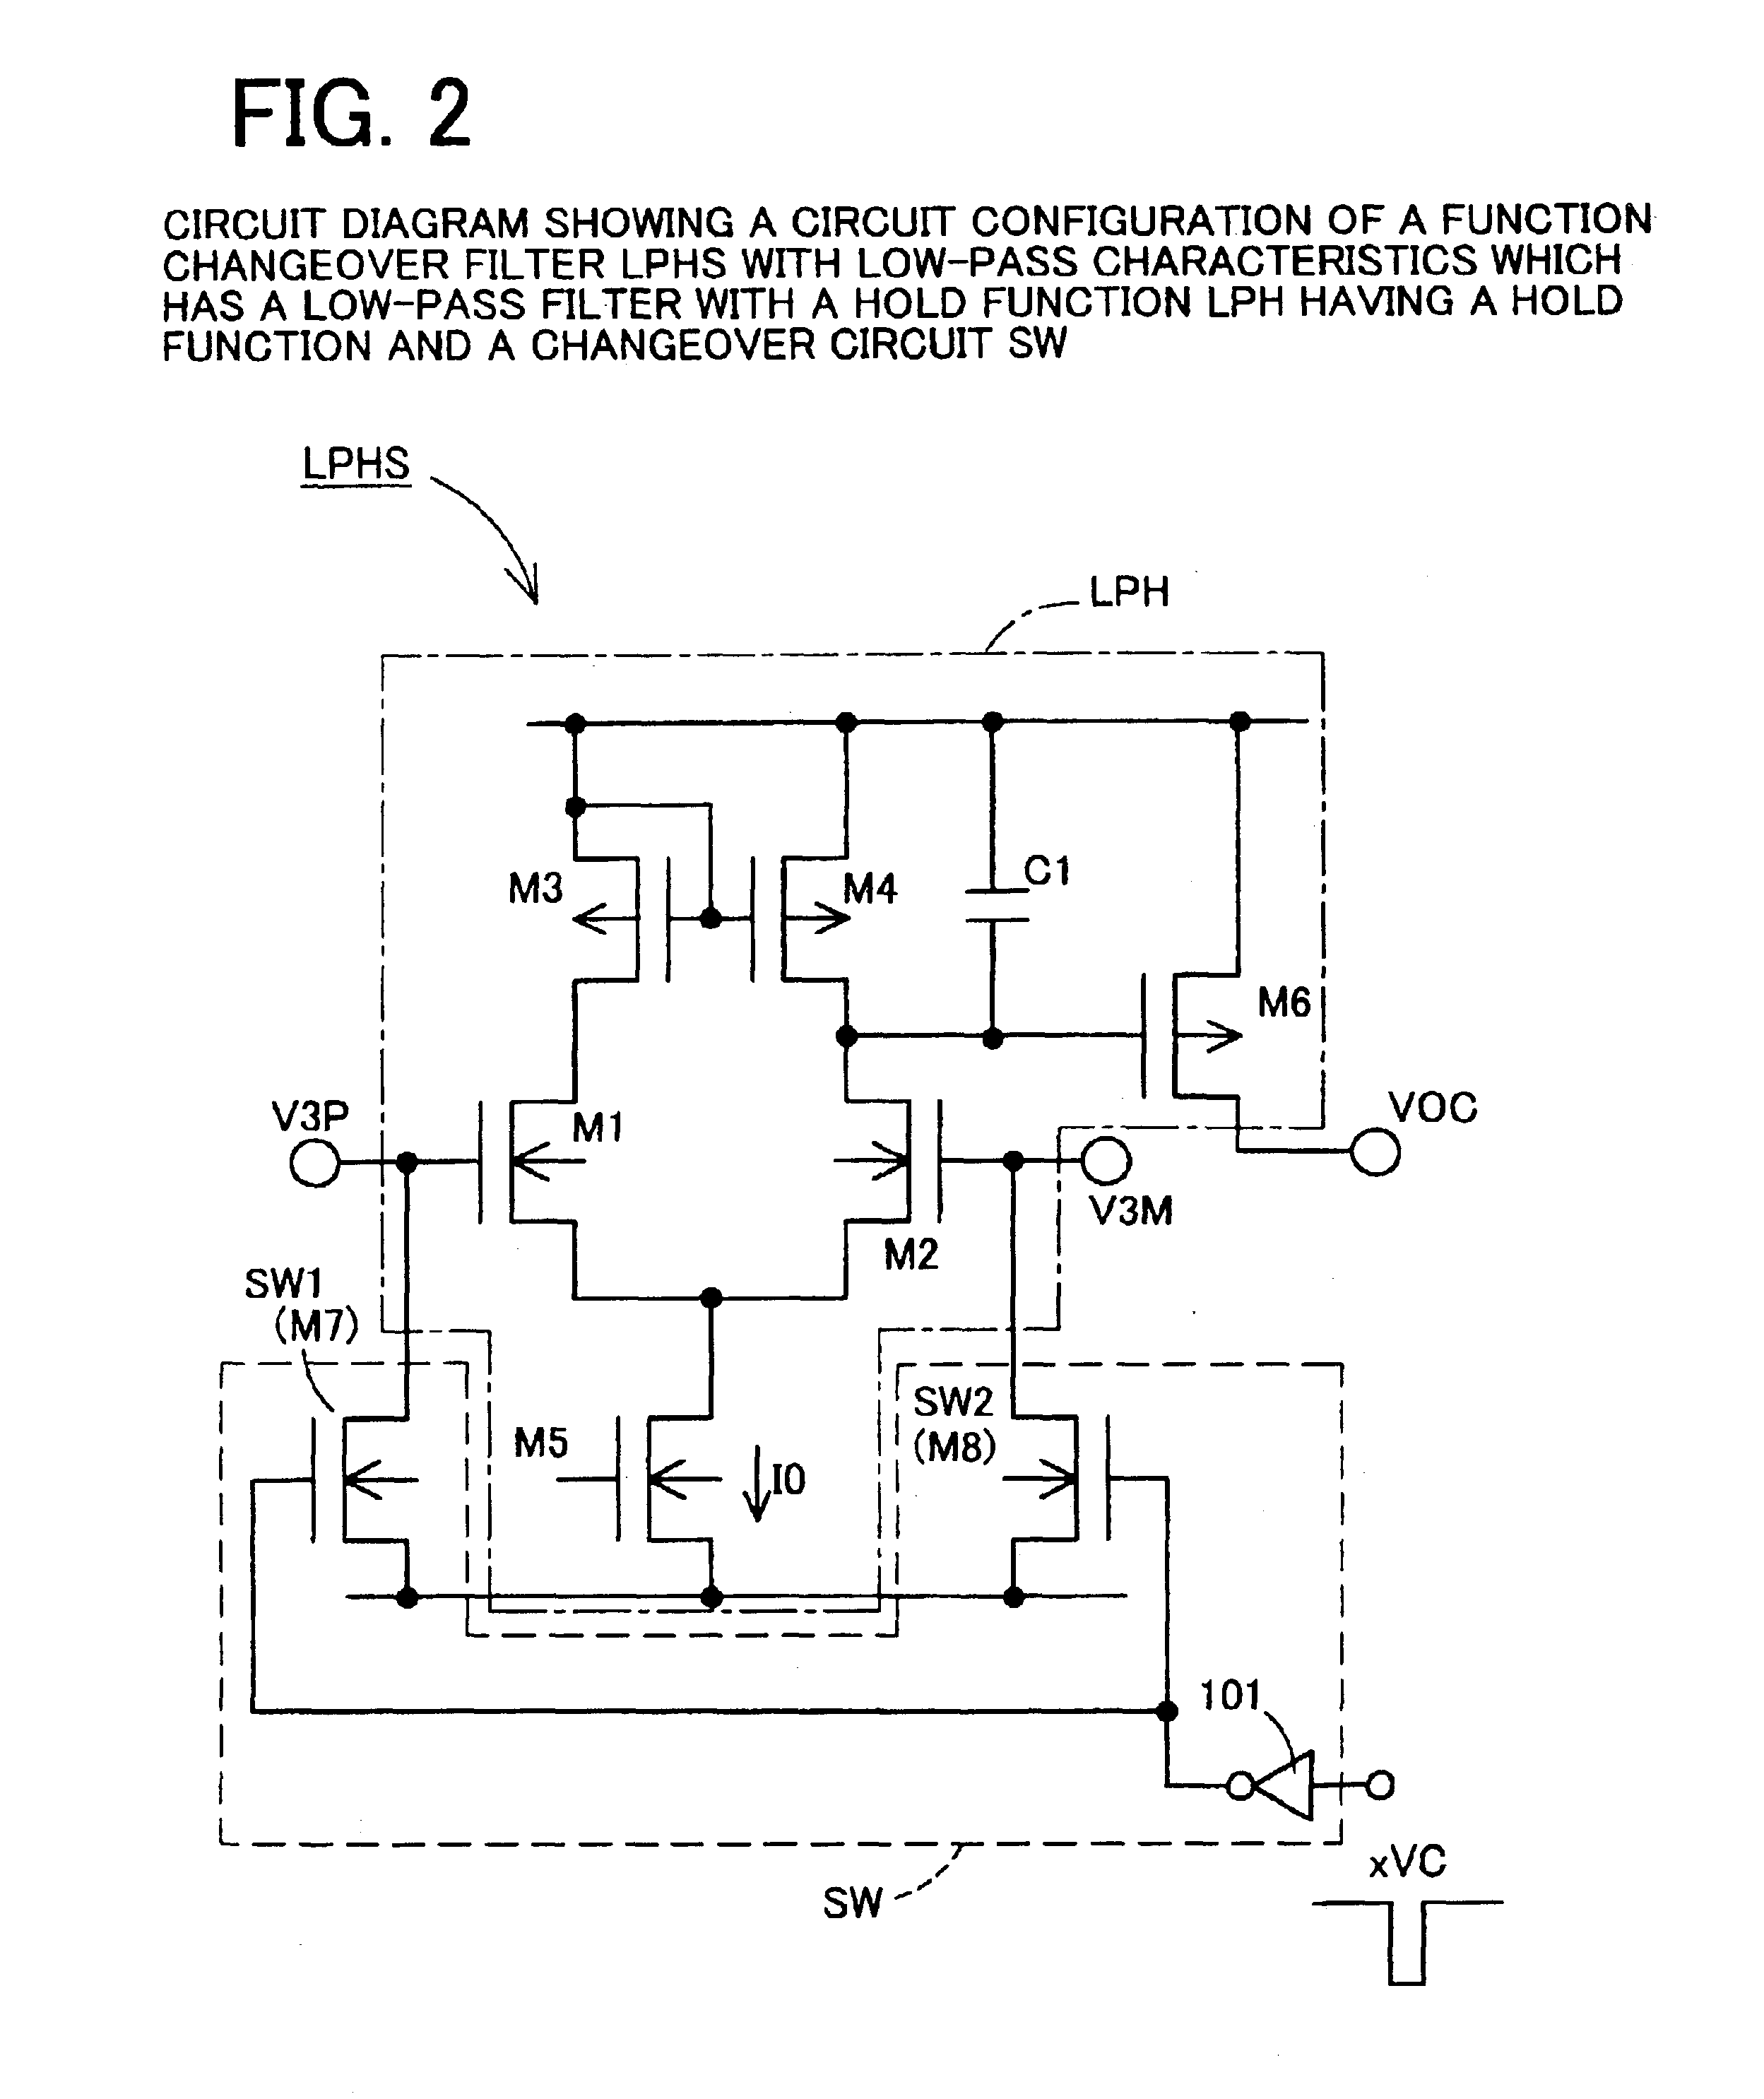 DC offset cancellation circuit, differential amplification circuit with DC offset cancellation circuit, photo-electric pulse conversion circuit, pulse shaping circuit, and pulse generation circuit